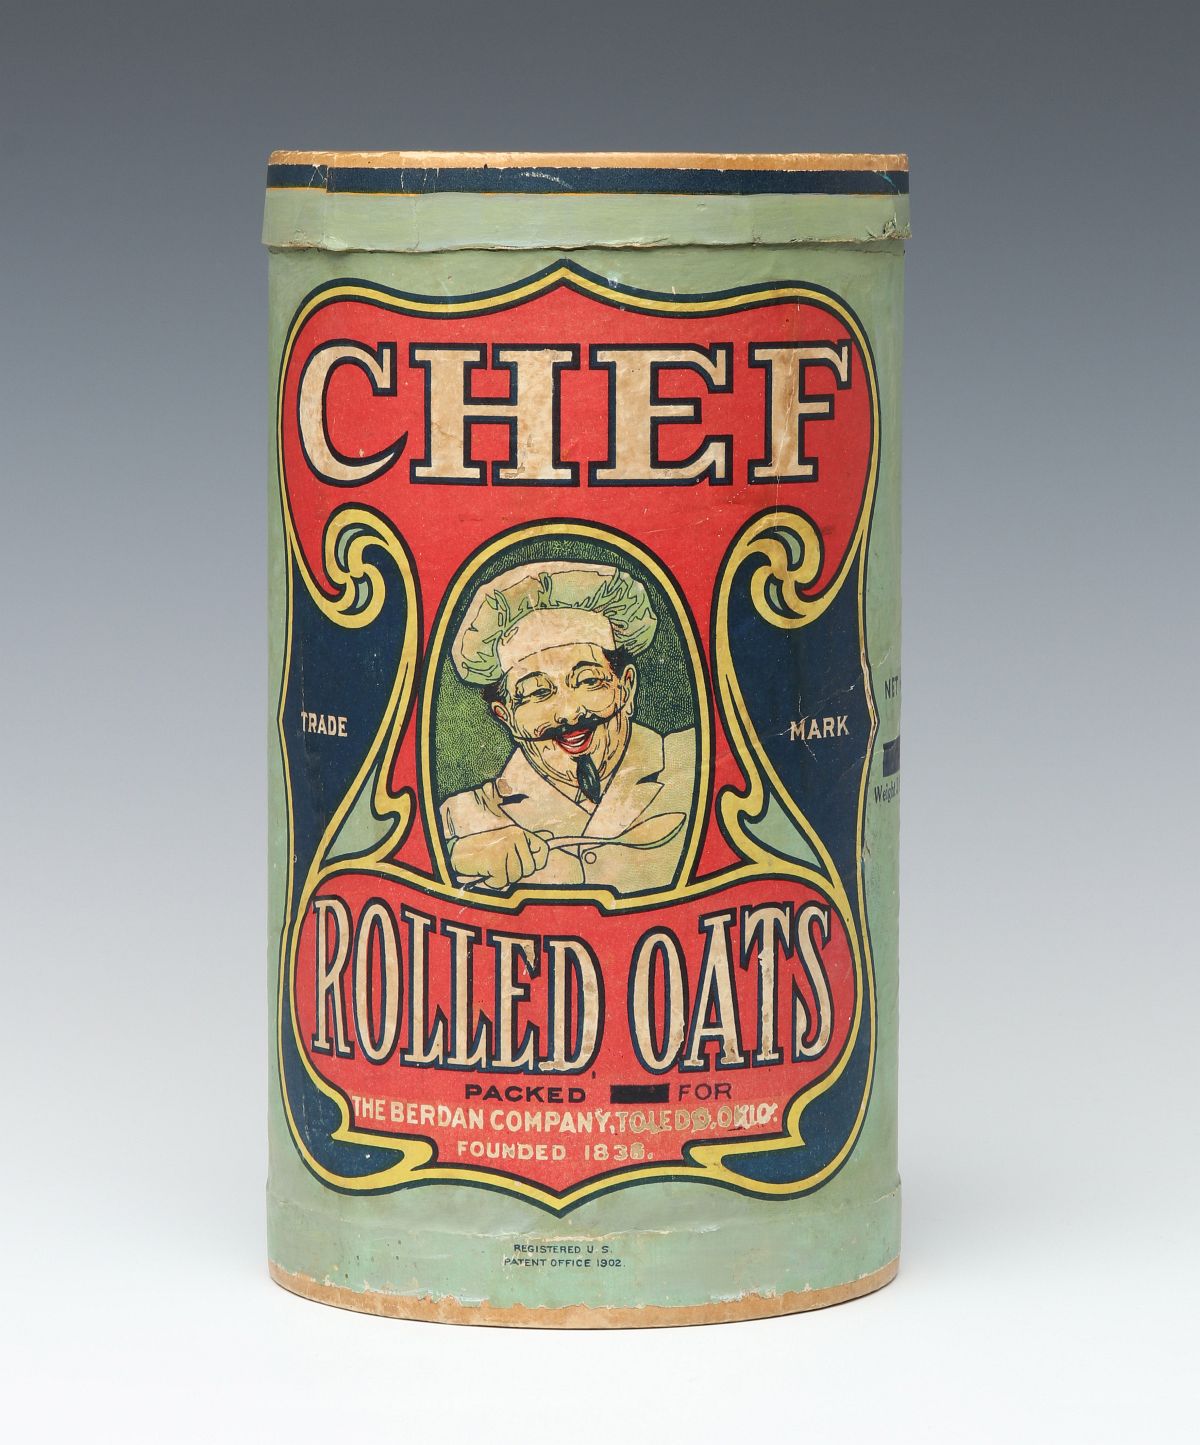 A CHEF BRAND ROLLED OATS CONTAINER CIRCA 1902